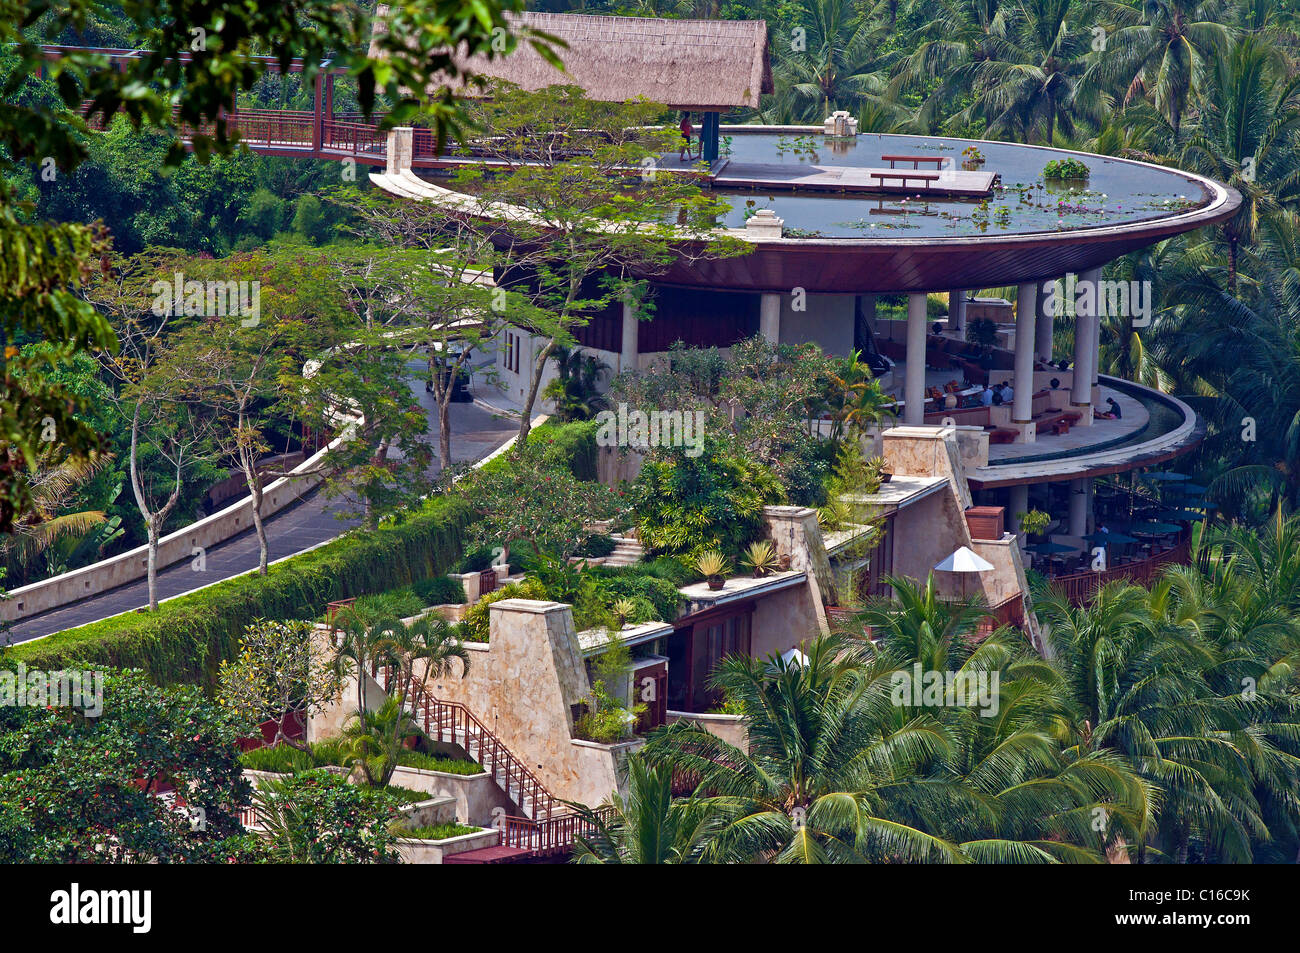 The luxury Four Seasons Hotel set amongst the rice paddies at Sayan in the Ayung River Valley in Bali, Indonesia Stock Photo